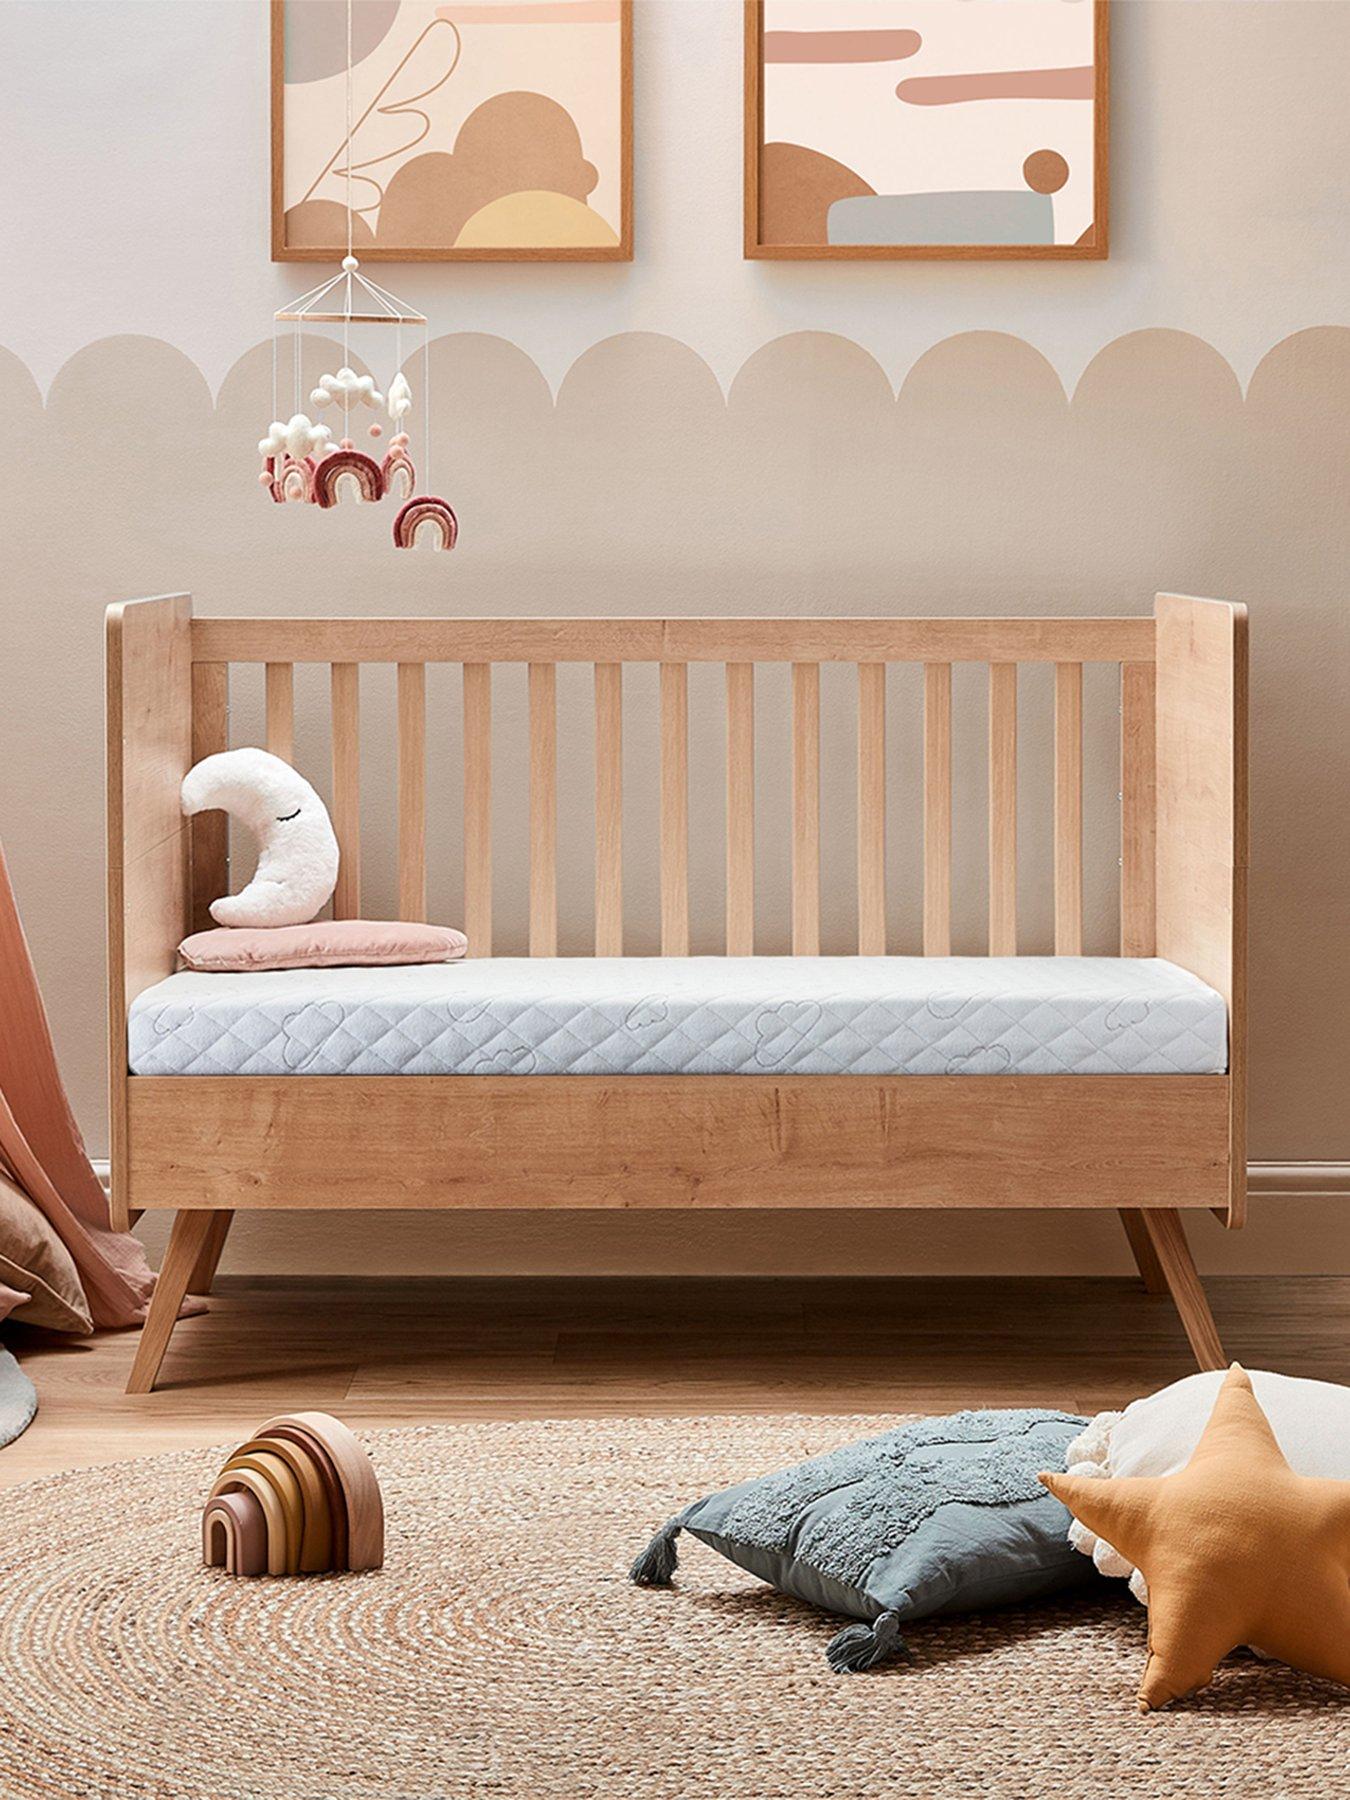 BABY COT BED «HETRE» | 60 X 120 CM | WHITE + NATURAL